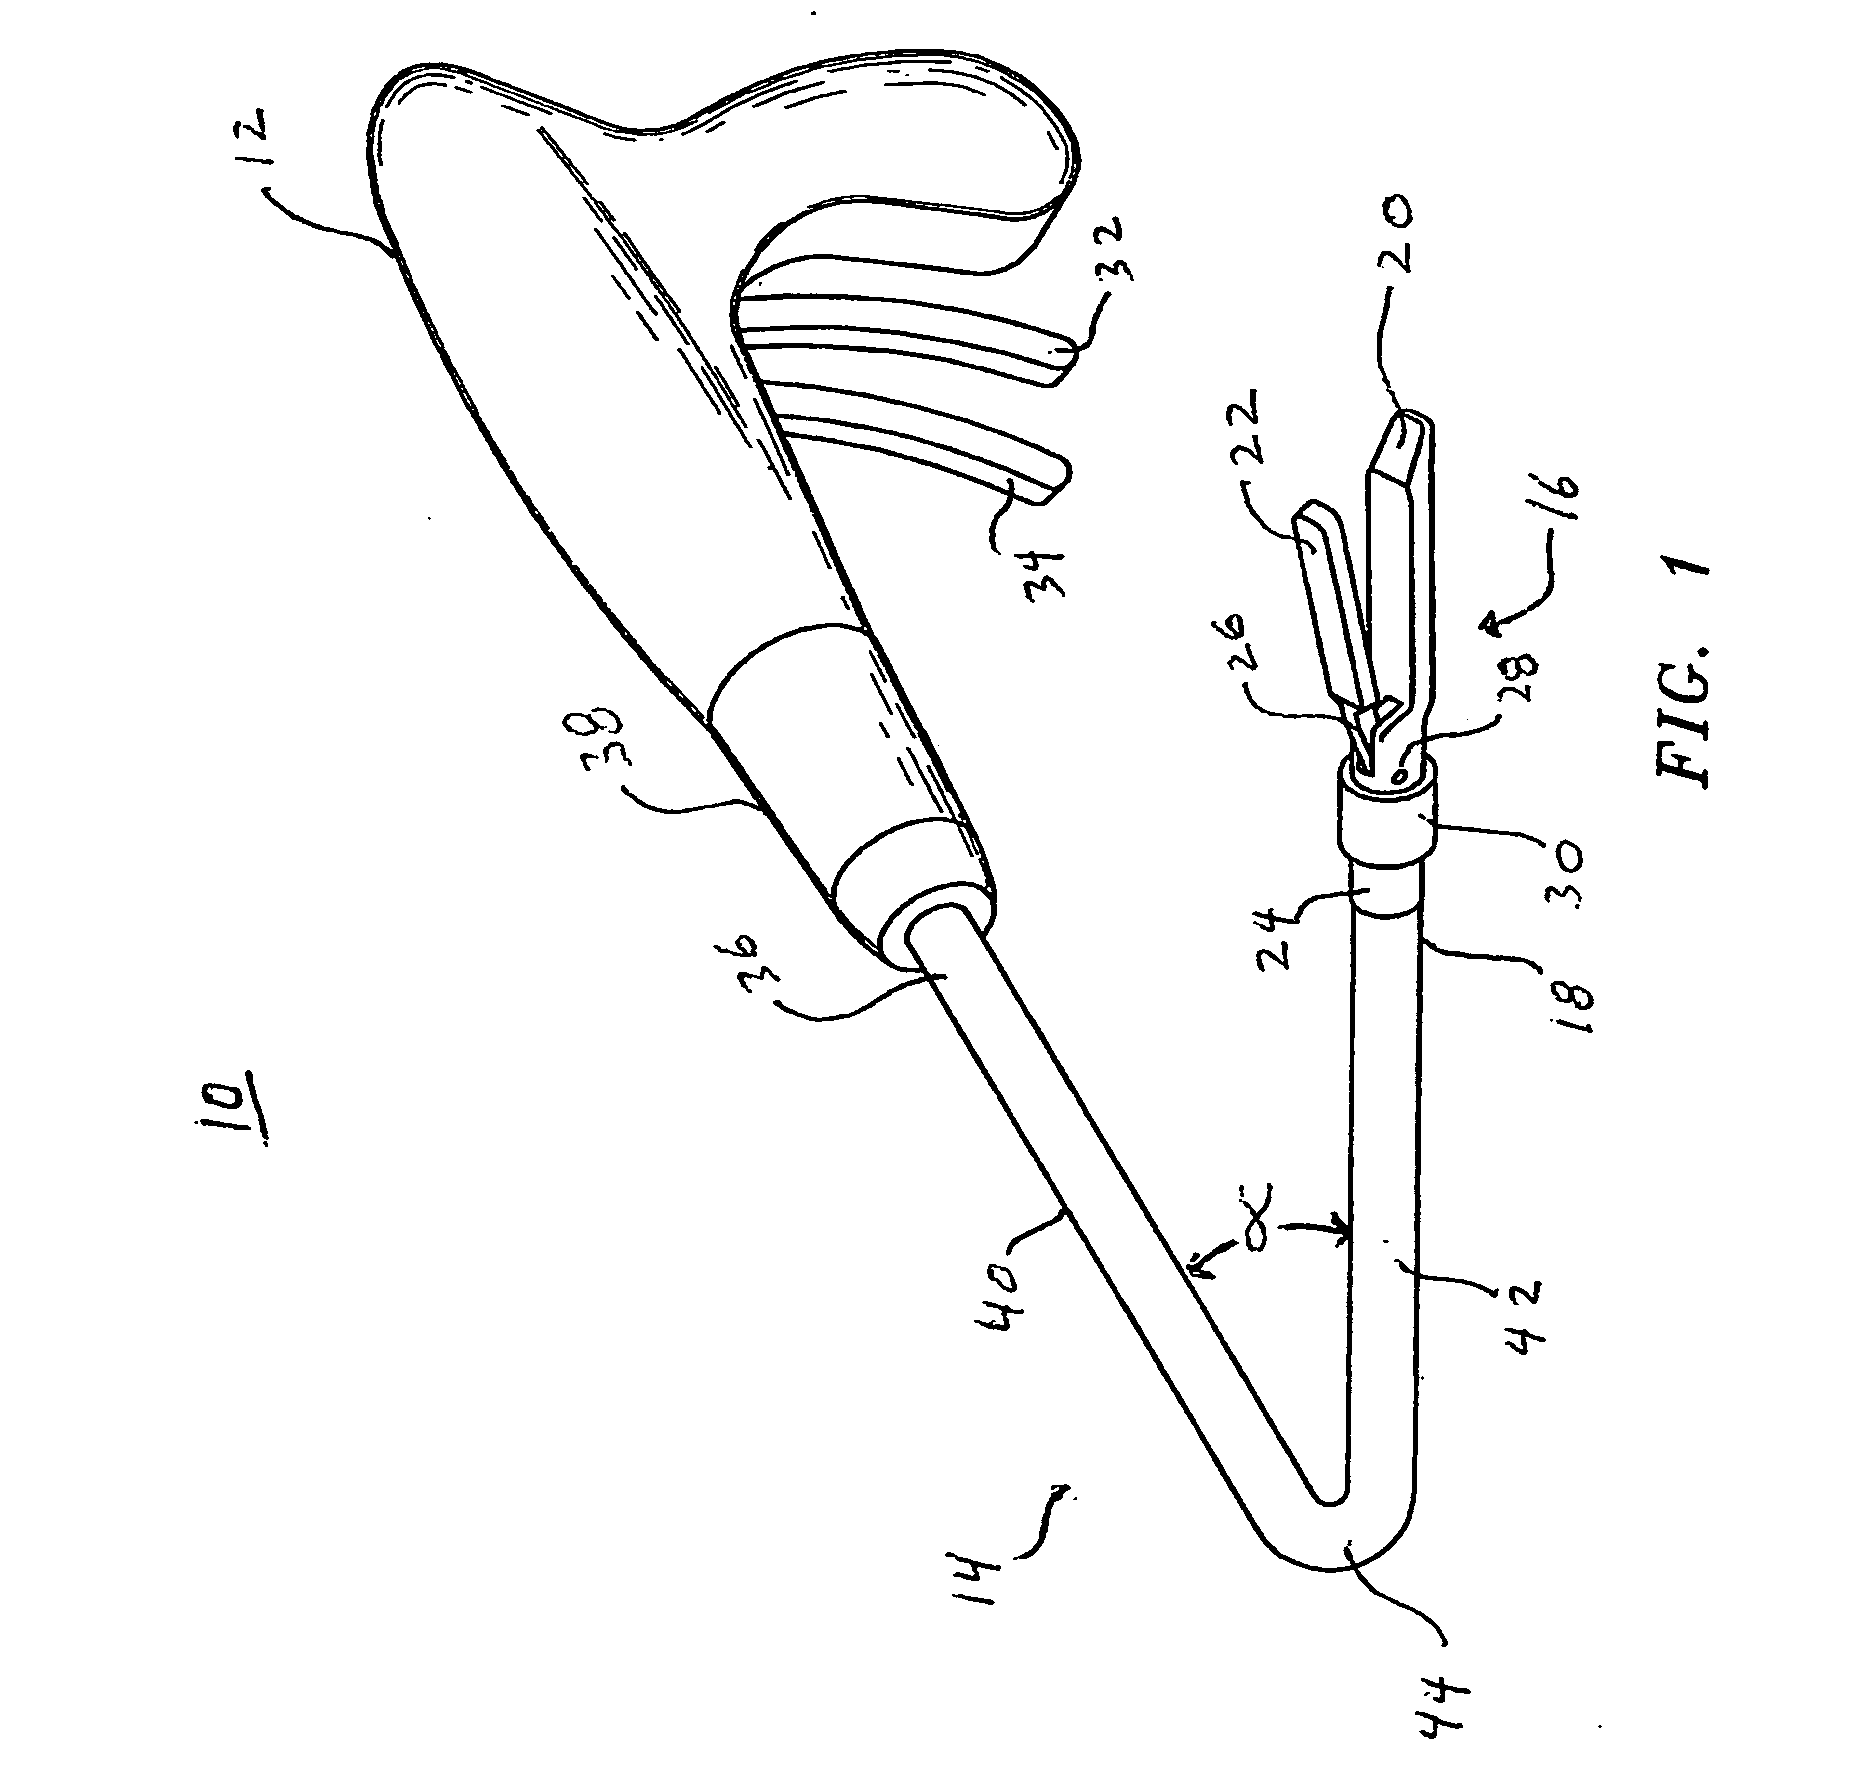 Staple driver for articulating surgical stapler